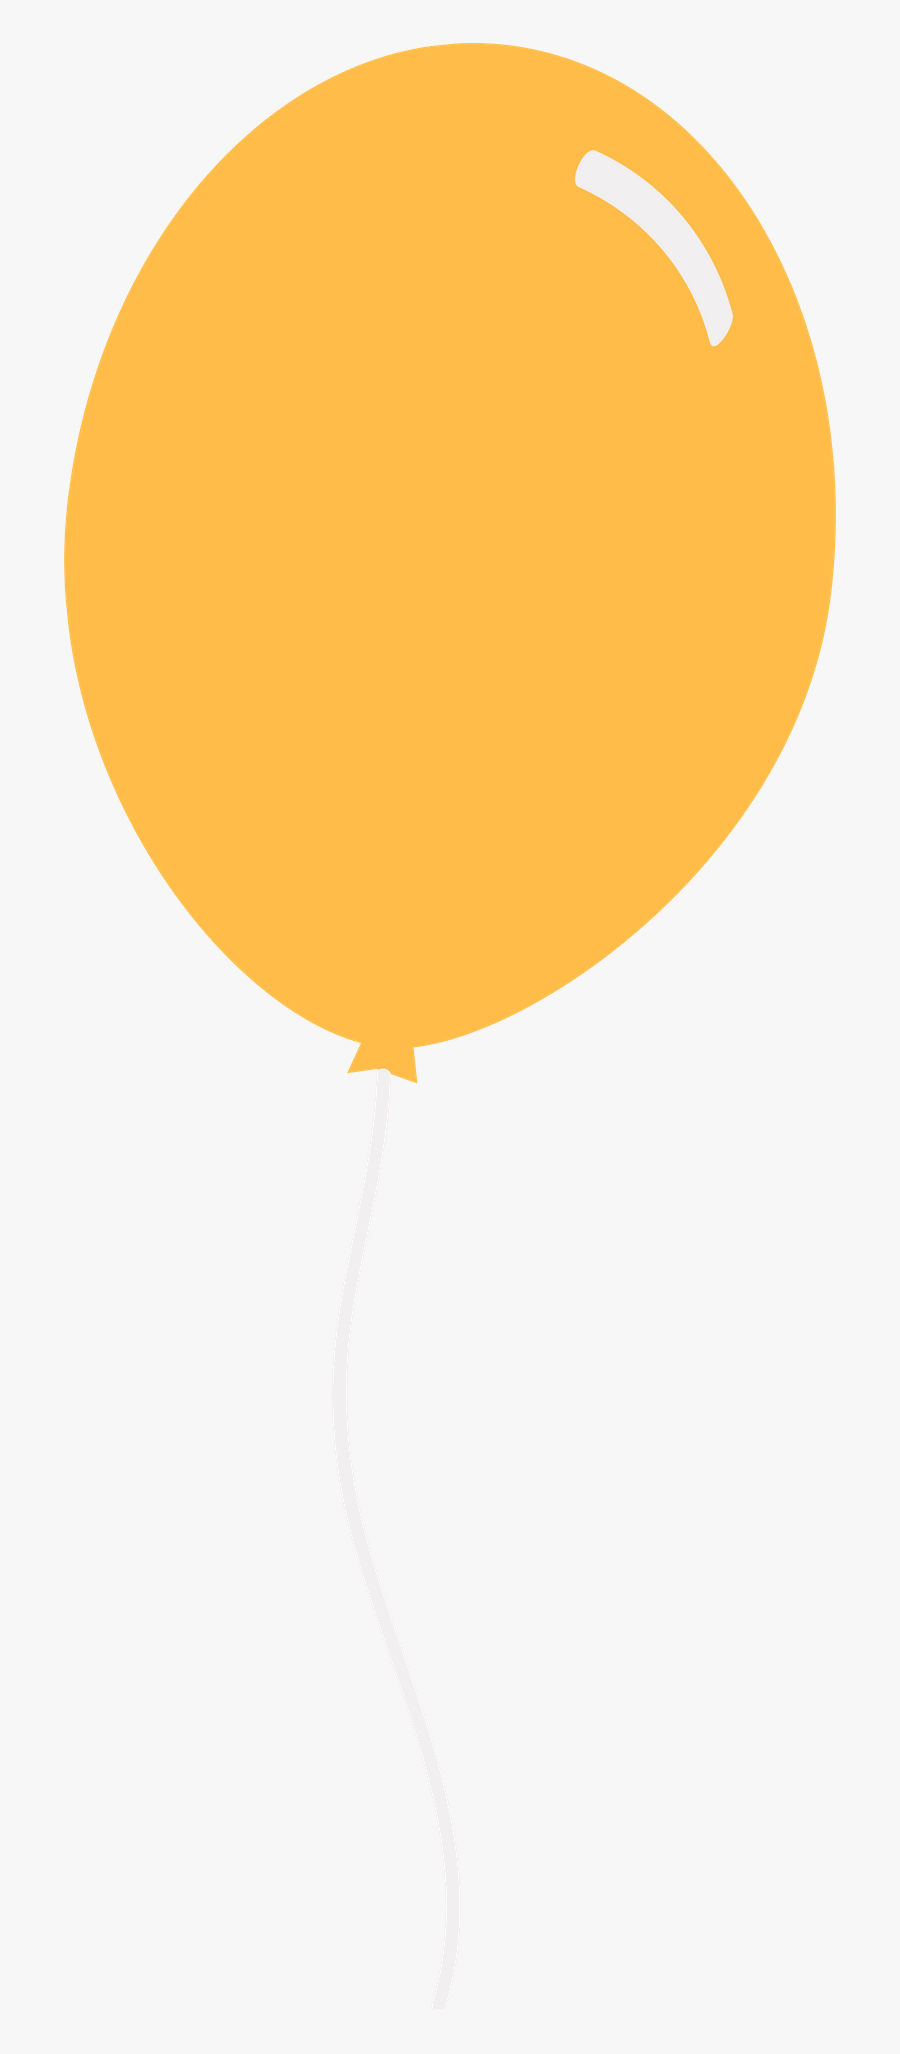 Yellow Balloon Png, Transparent Clipart